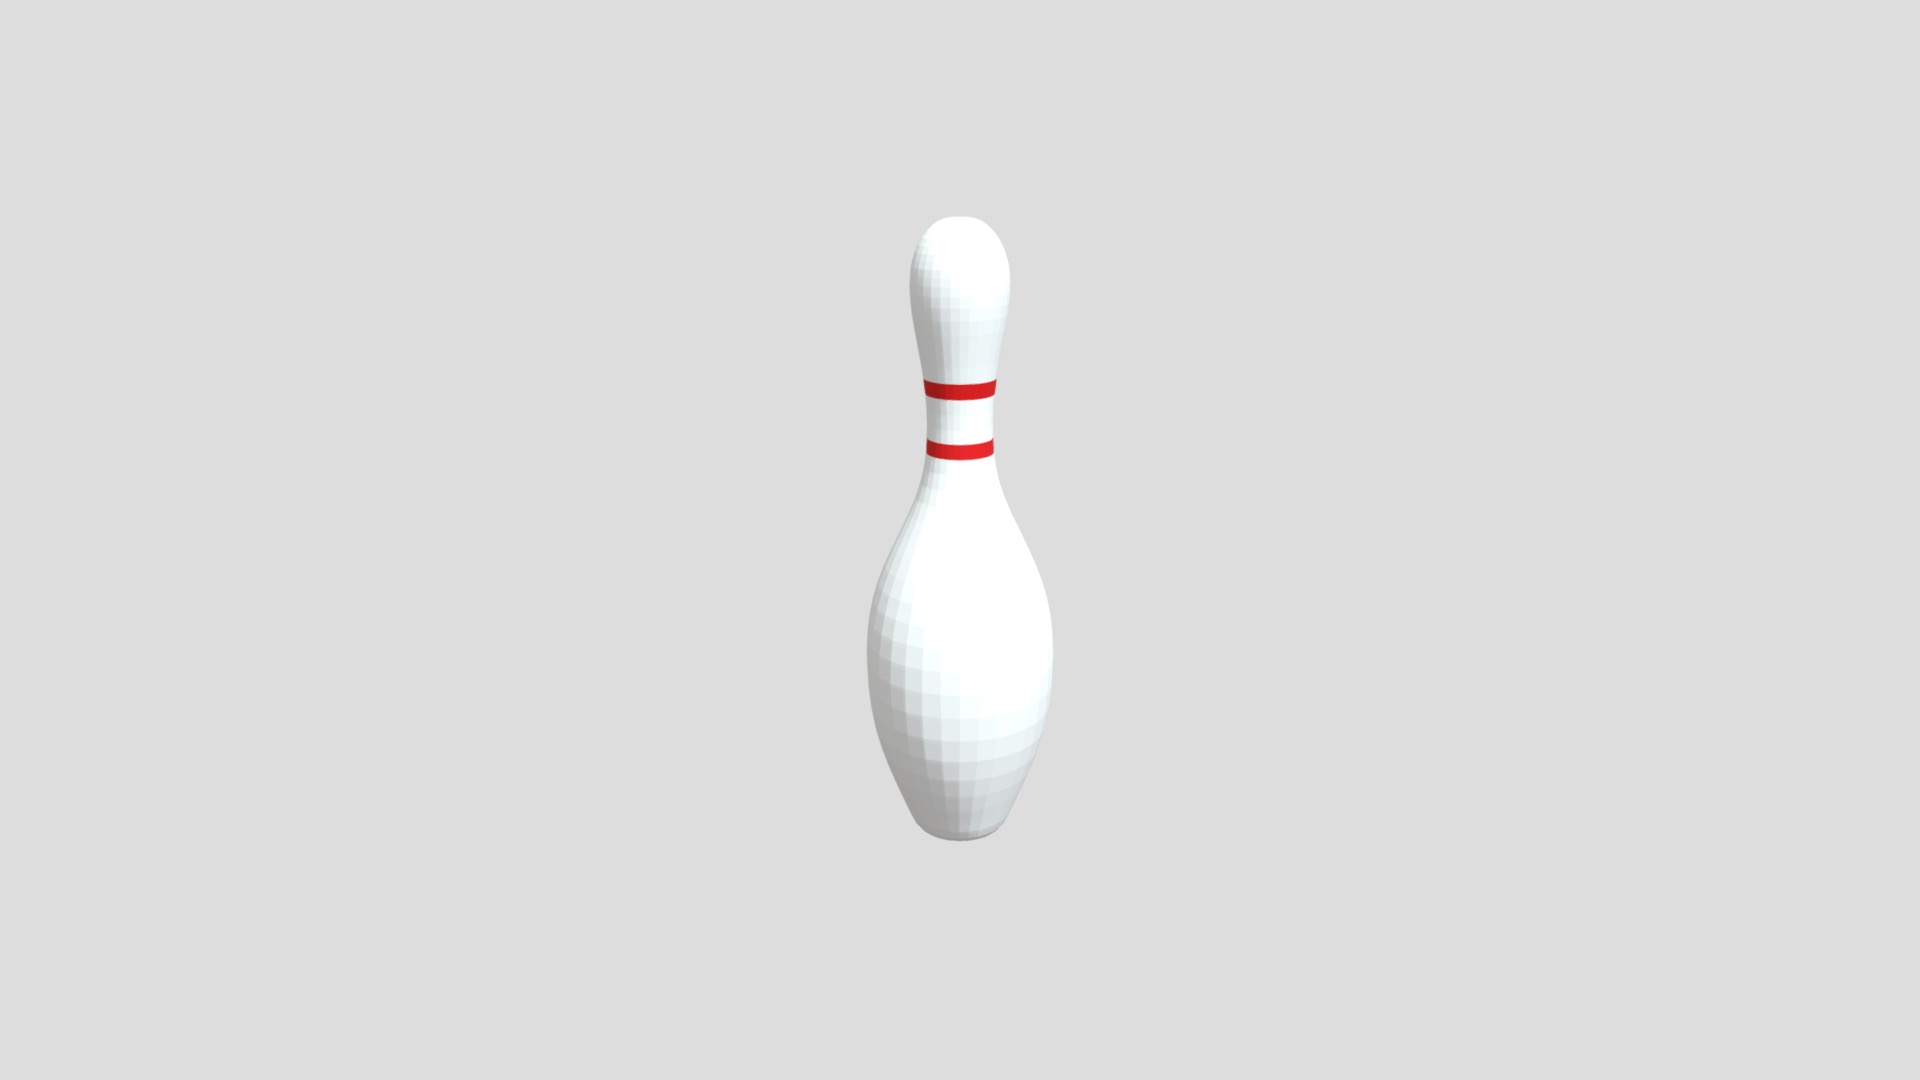 3D model Bowling Pin - This is a 3D model of the Bowling Pin. The 3D model is about a white and red capsule.